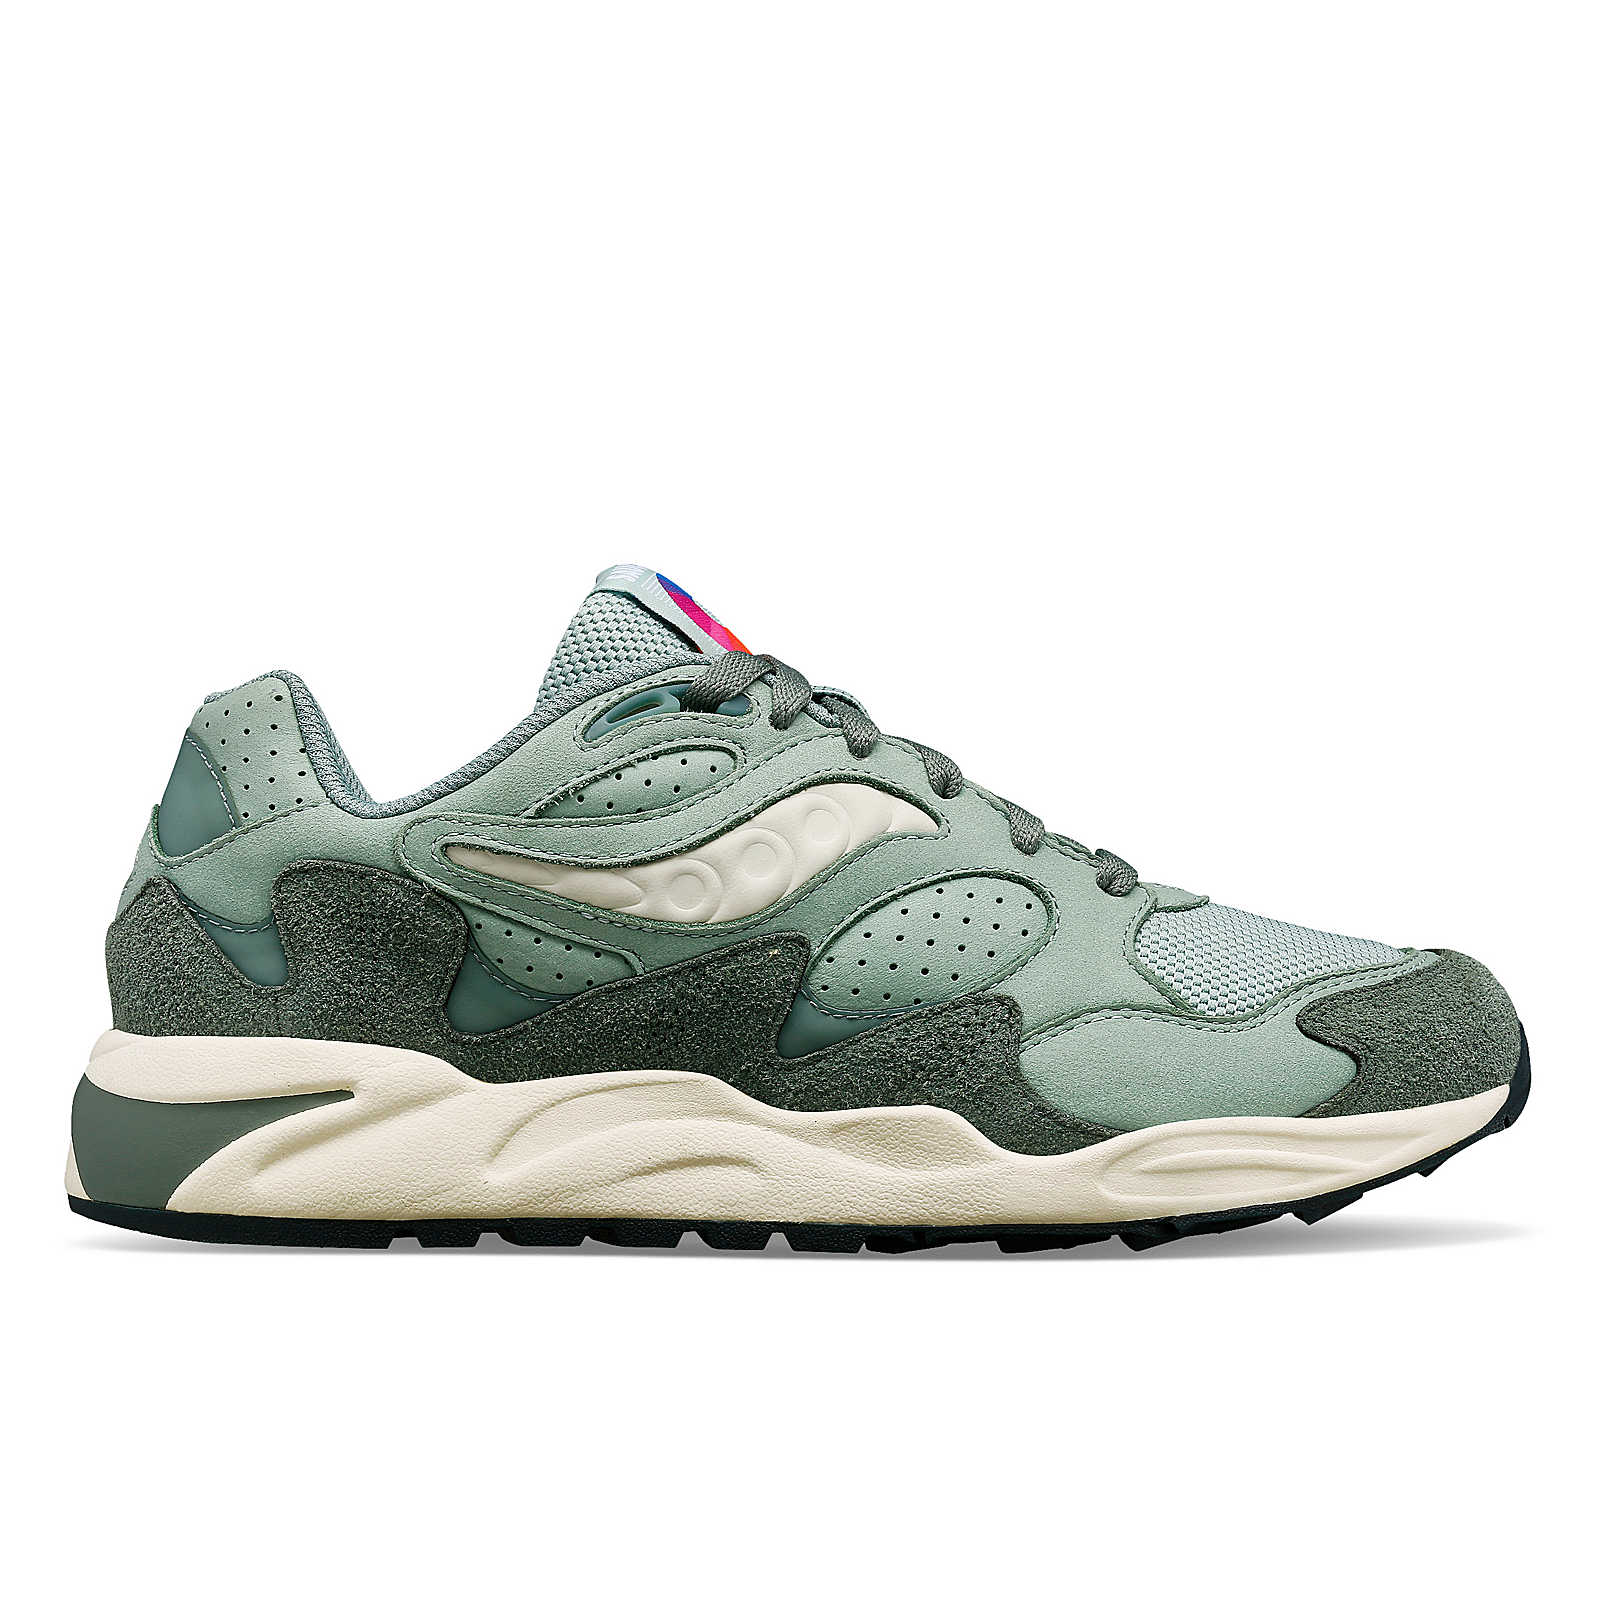 Last month END and s10681-20 Saucony dropped the White Noise Chromatic Sage 3